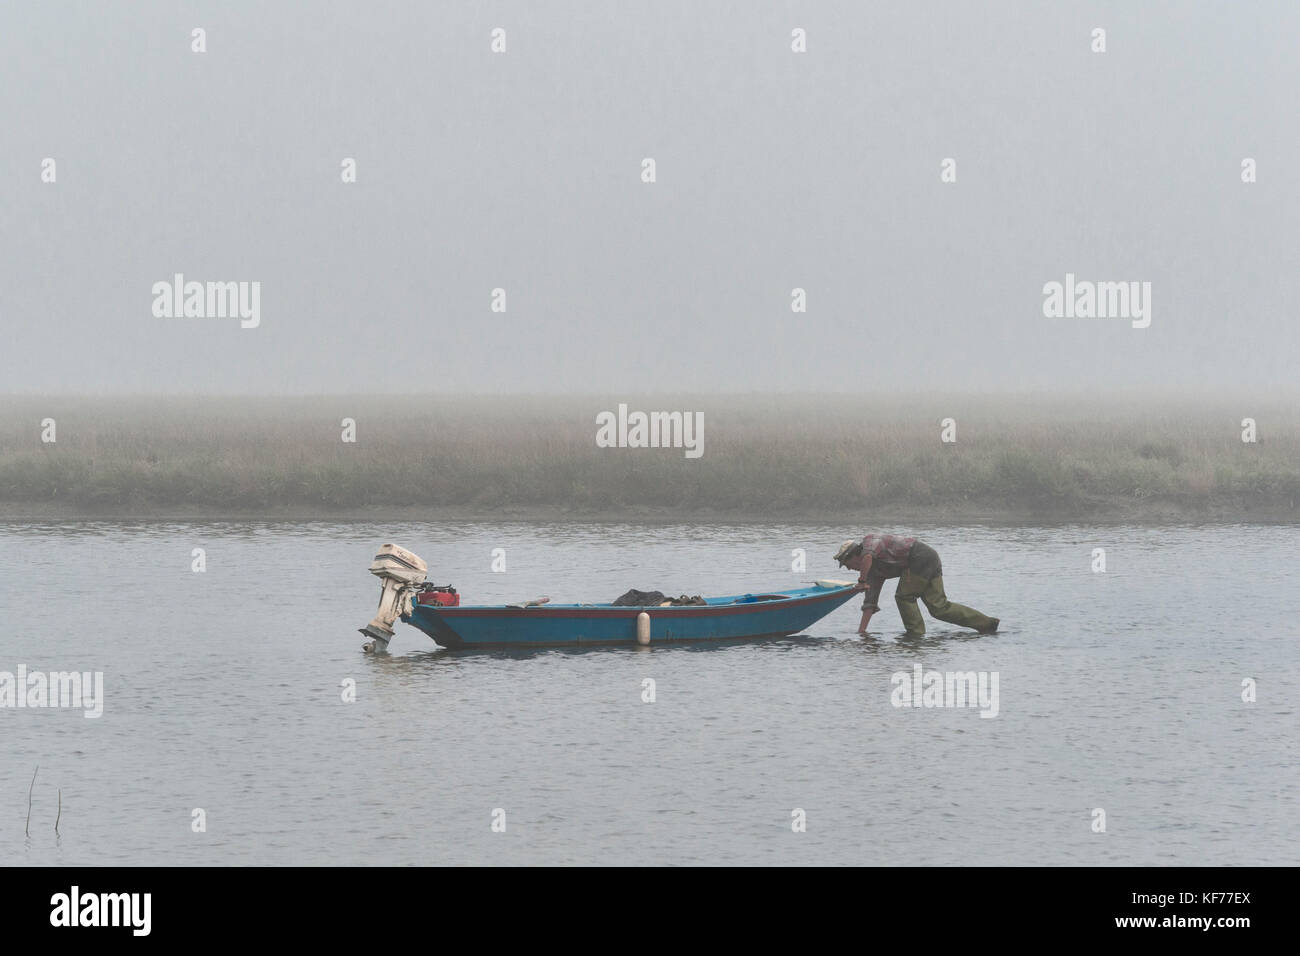 Venice, Italy. A fisherman gathering shellfish in the shallow water of the Venetian lagoon at dawn on a misty morning Stock Photo